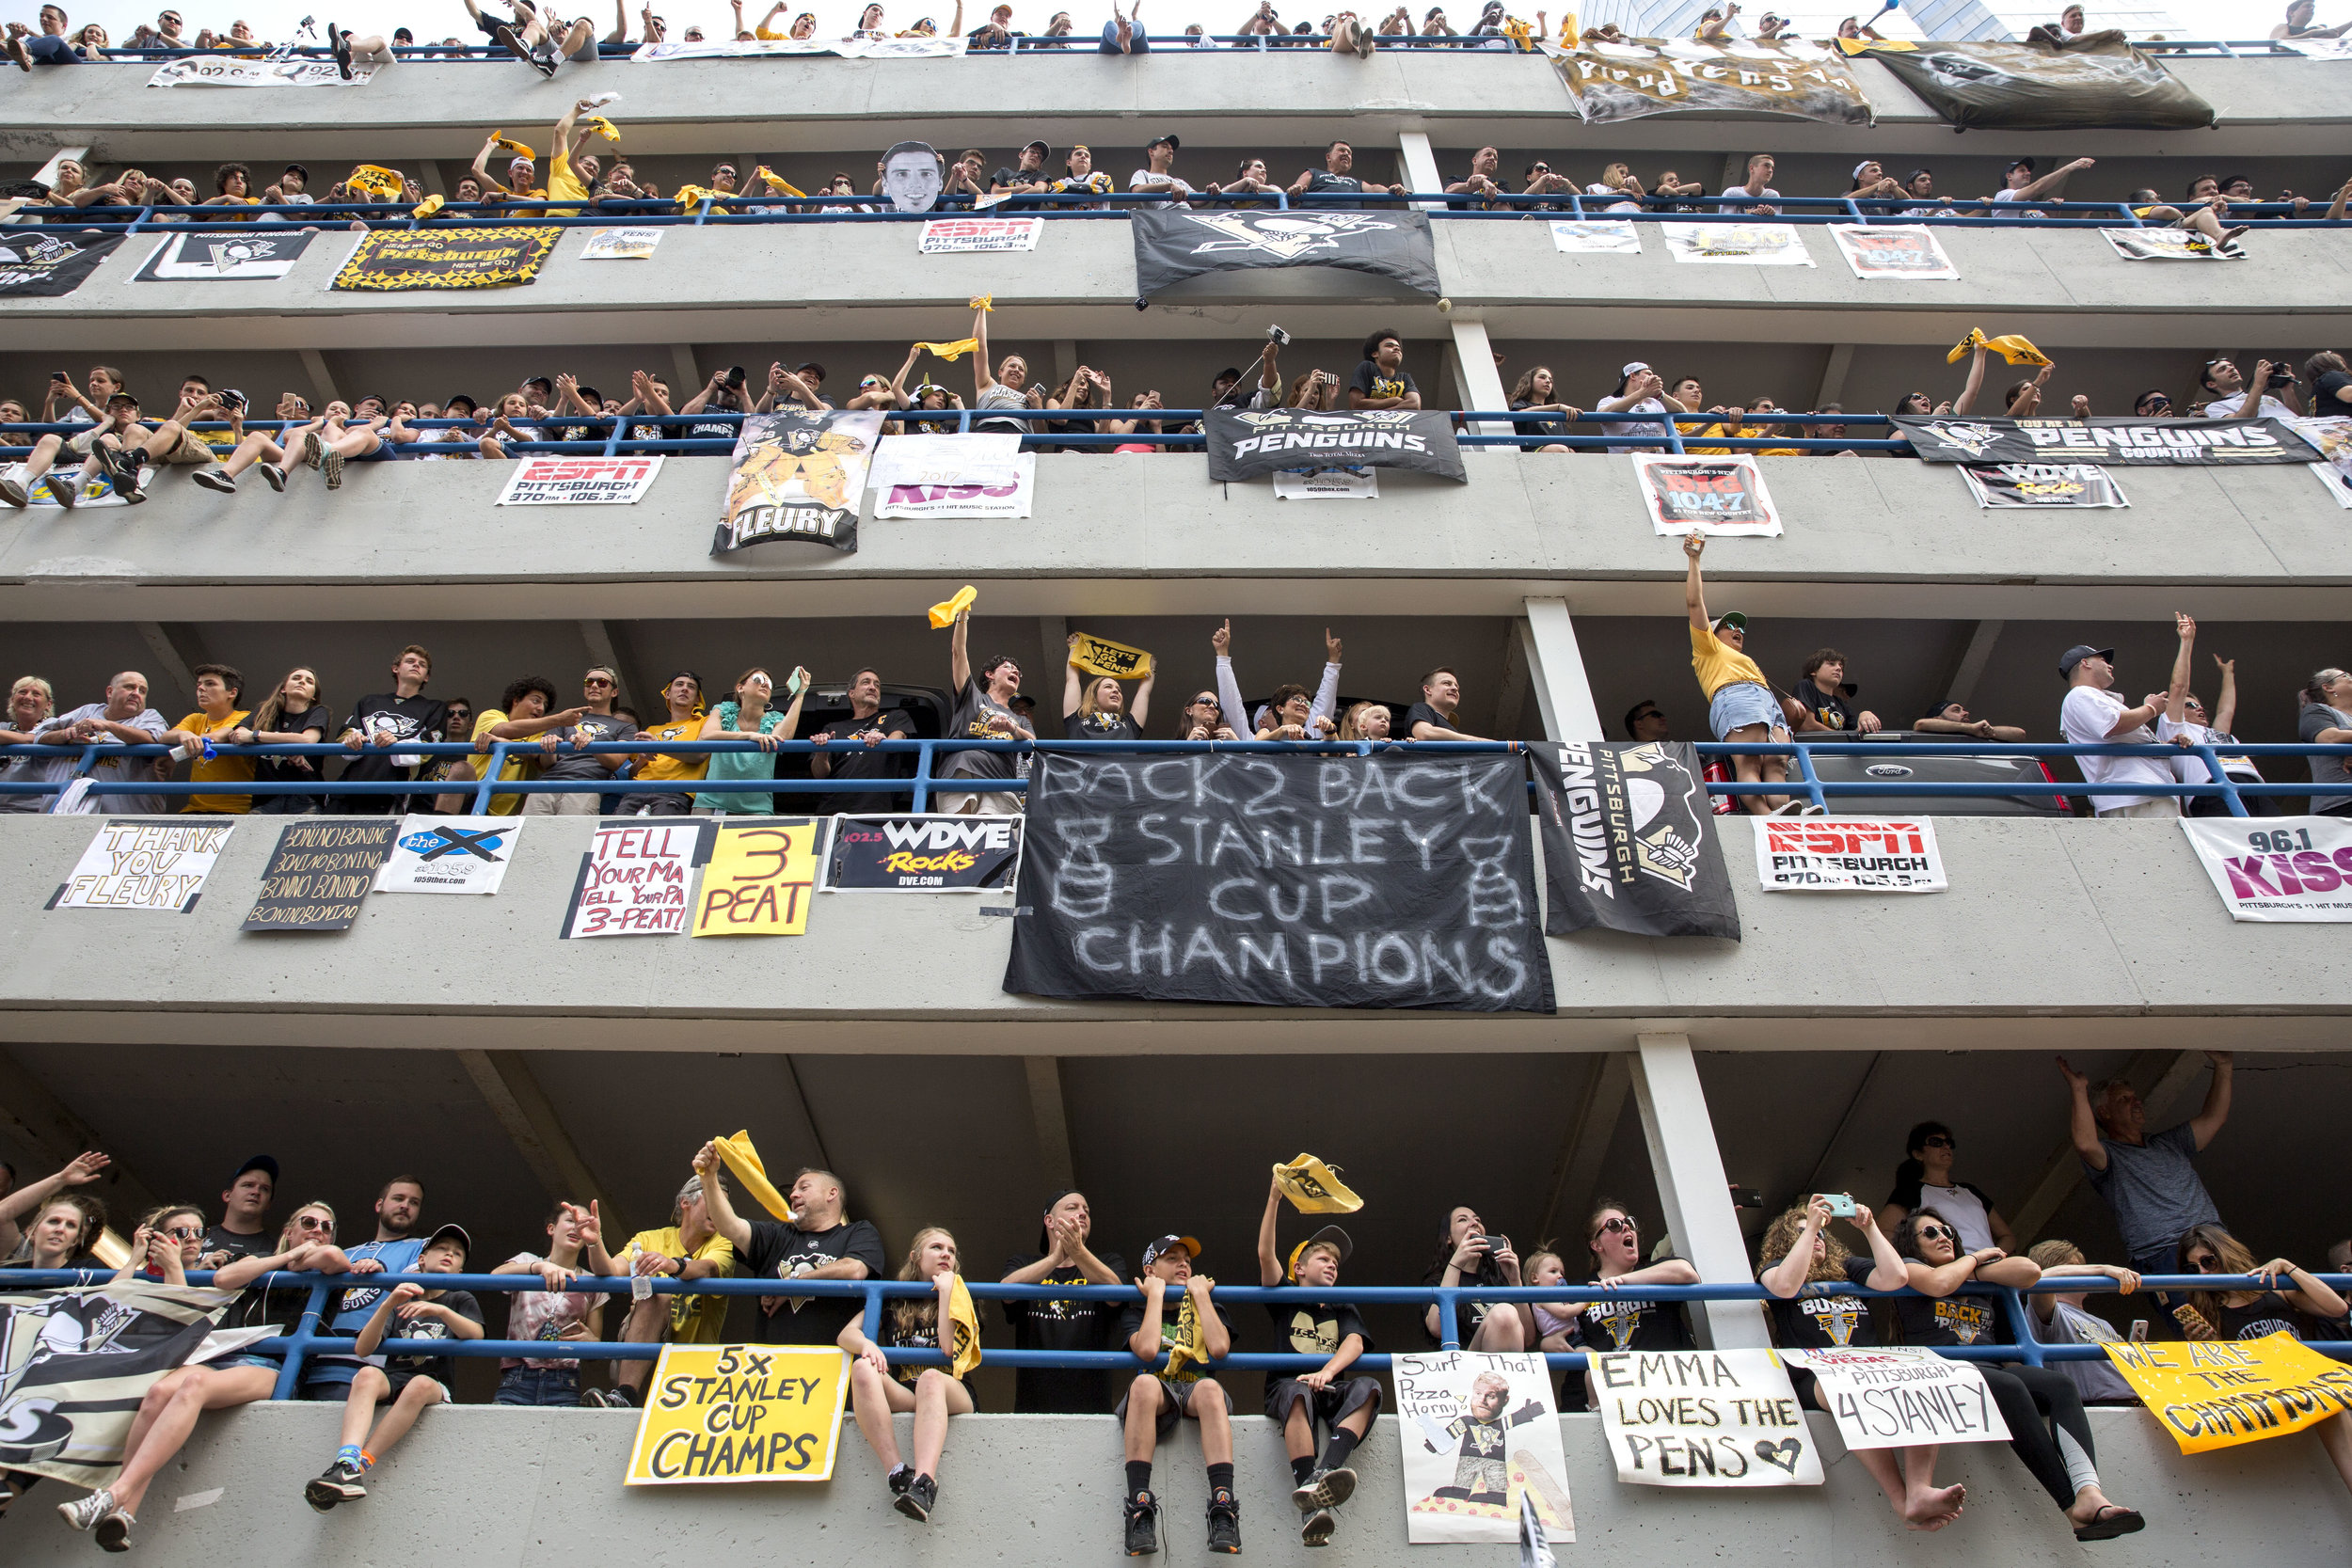  Fans occupy as much space as they can in the Allies Garage in downtown Pittsburgh as they cheer on the Penguins players during the victory parade on Wednesday, June 14, 2017. The Penguins defeated the Predators 2-0 in the Stanley Cup Final during ga